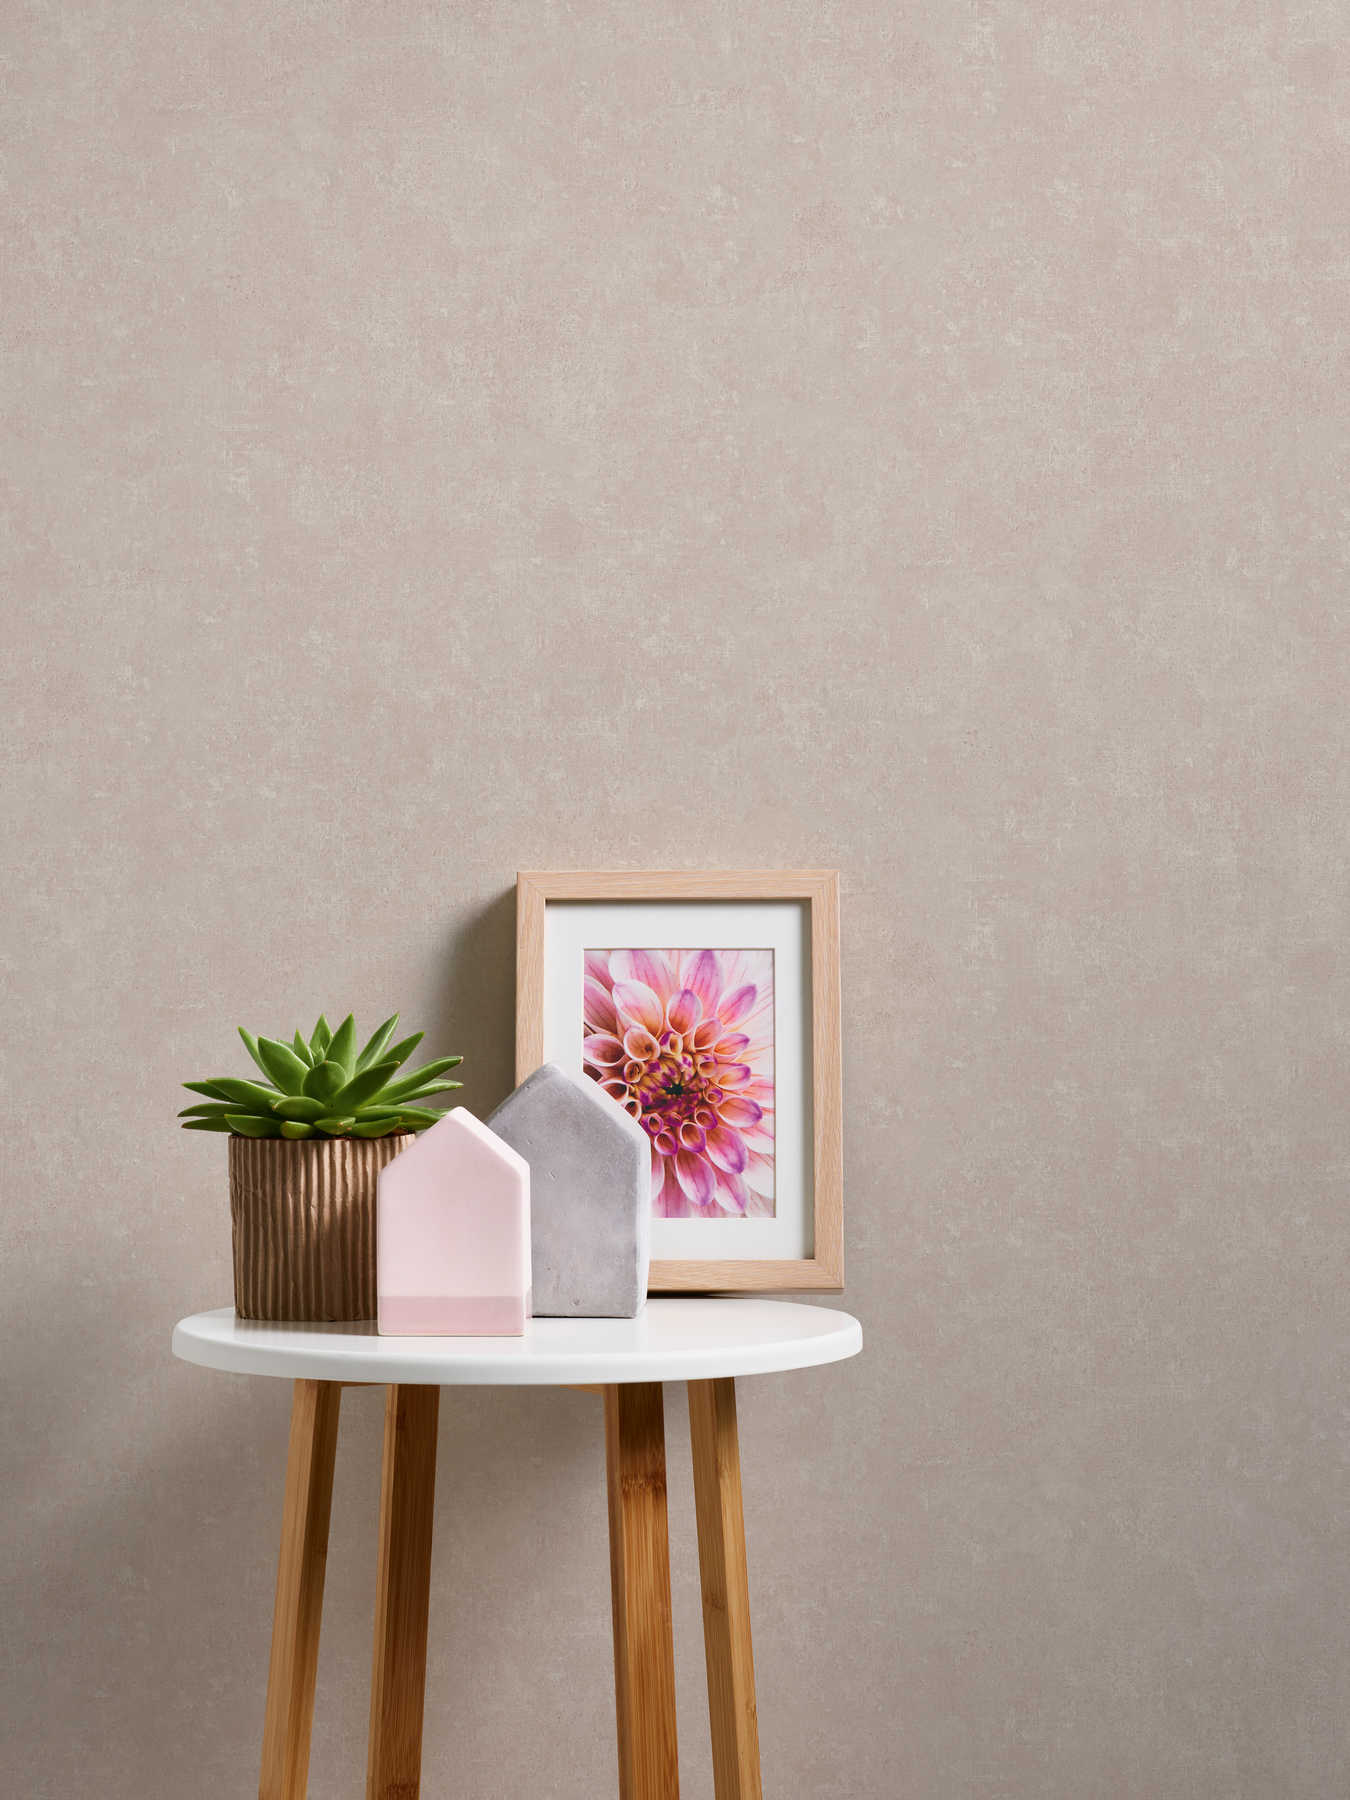             Wallpaper with subtle colour pattern in used look - pink
        